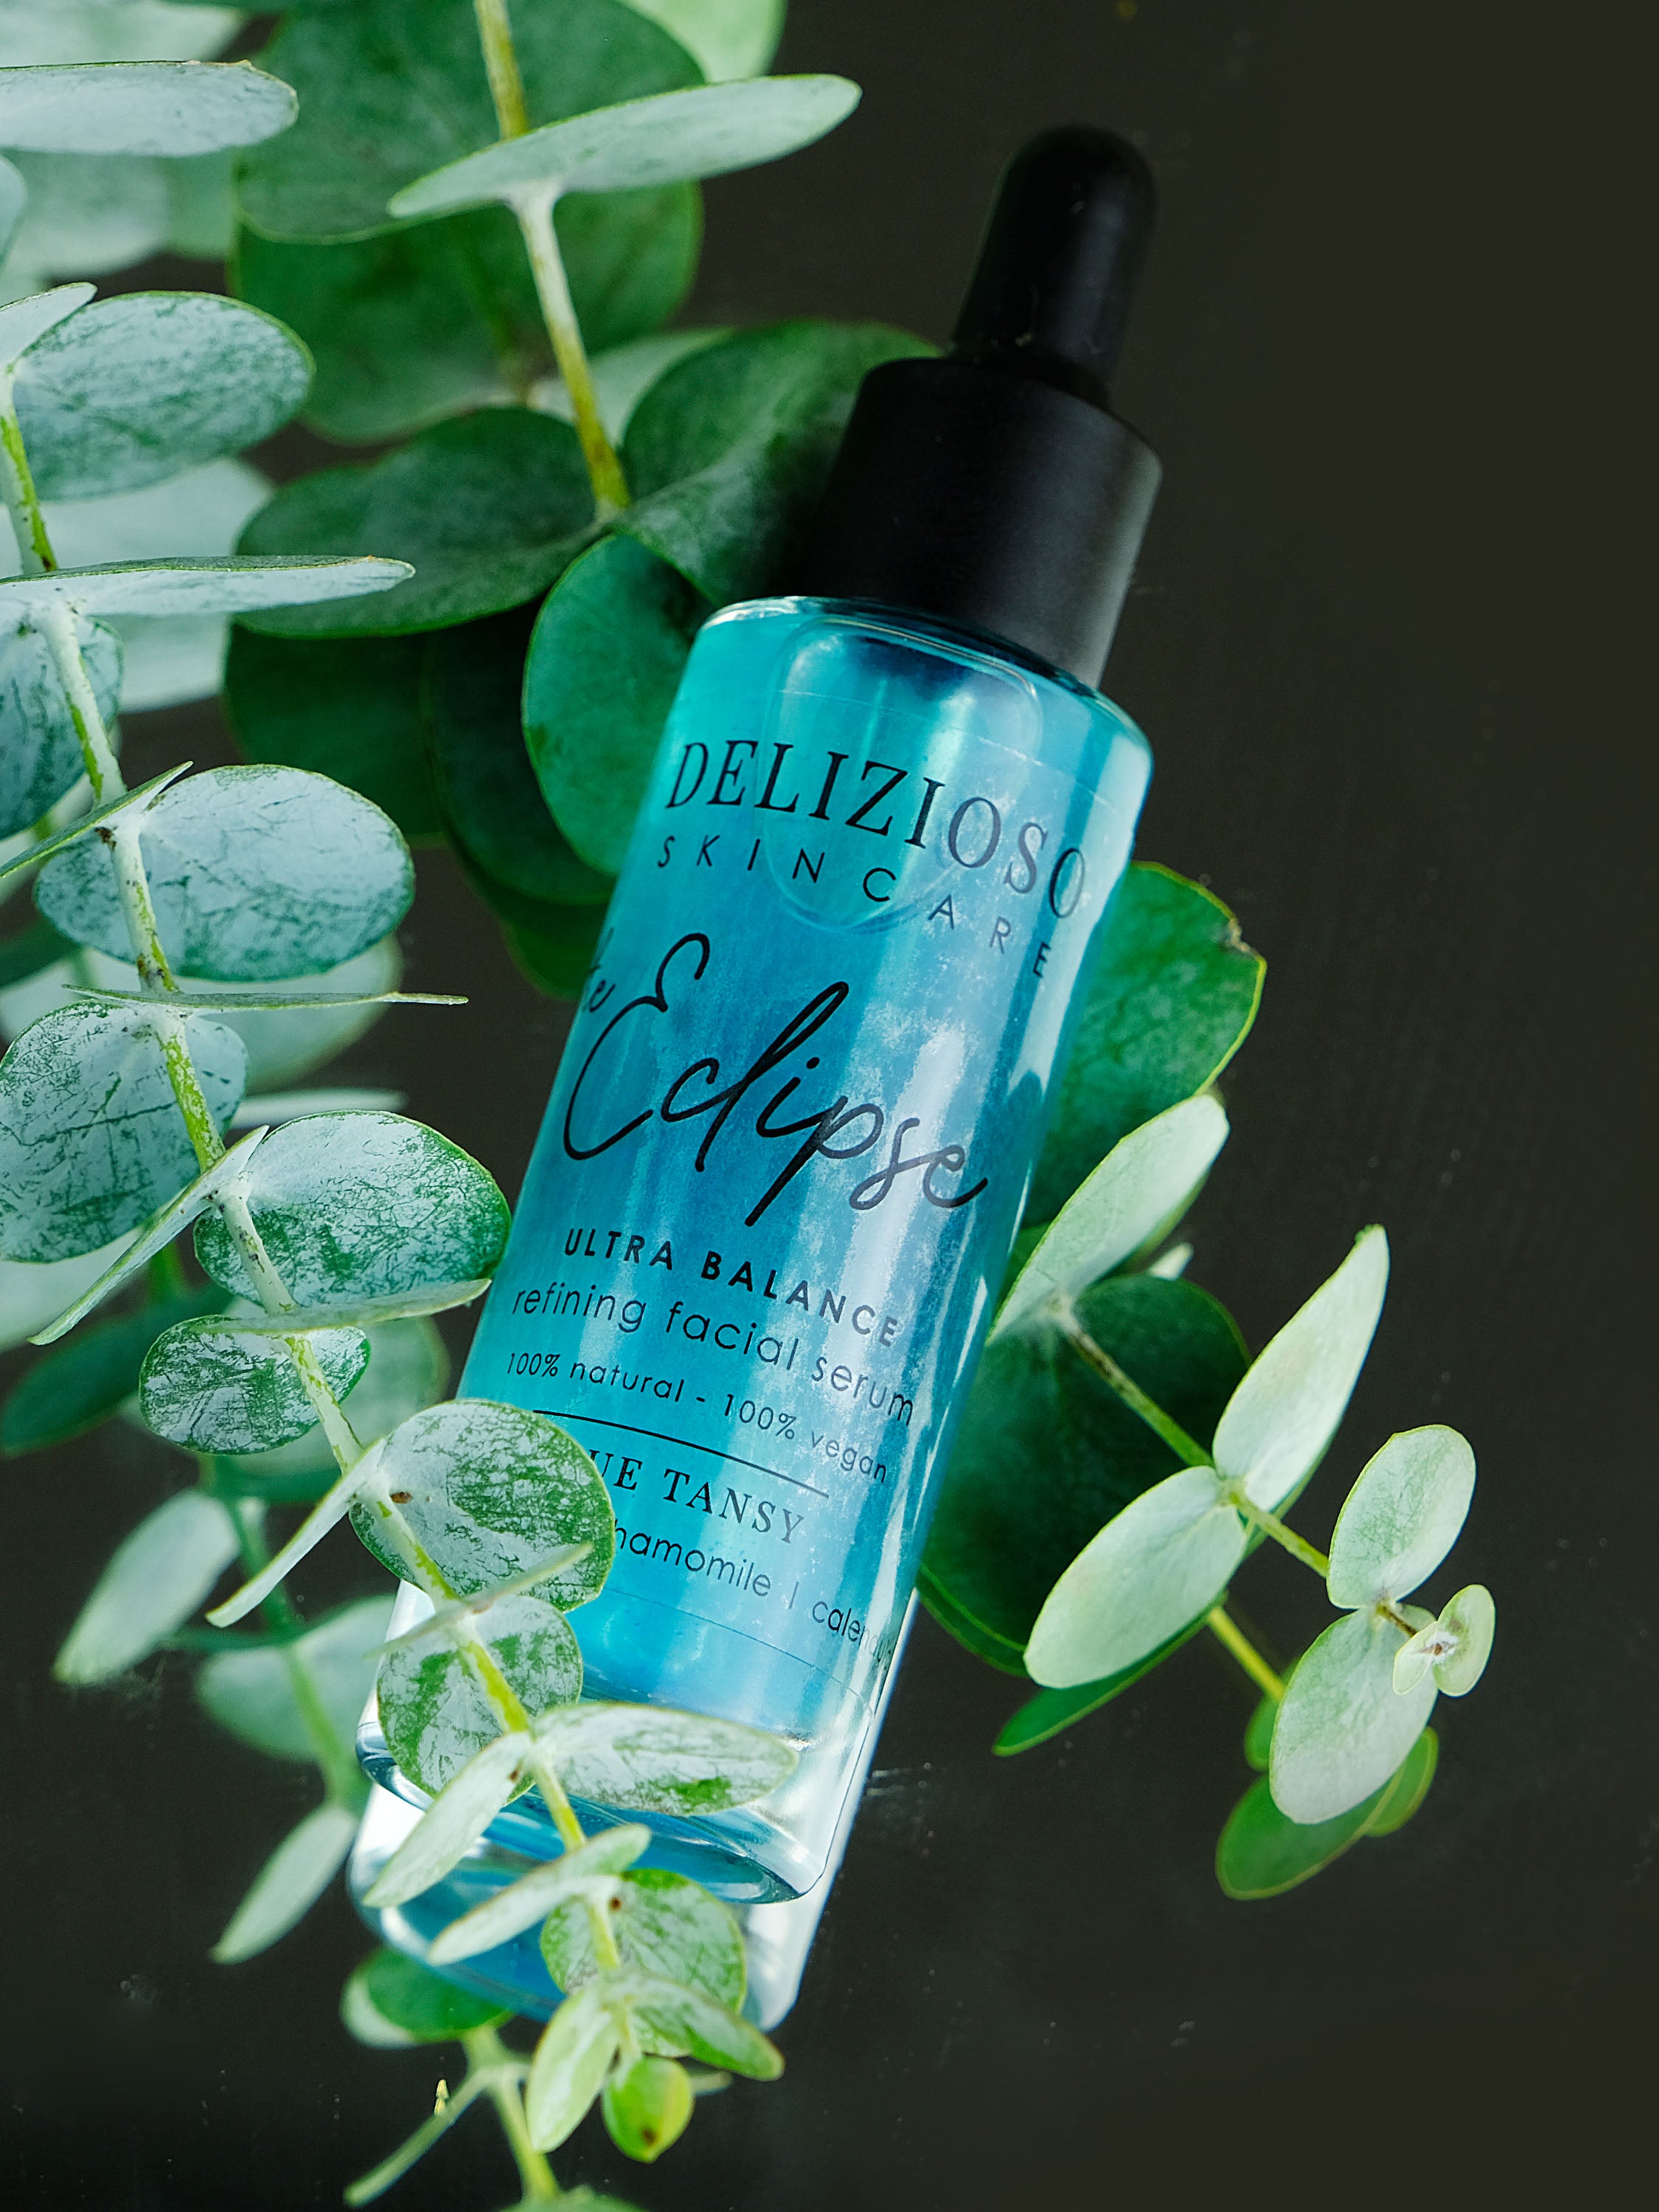 The Eclipse Blue Tansy Facial Serum